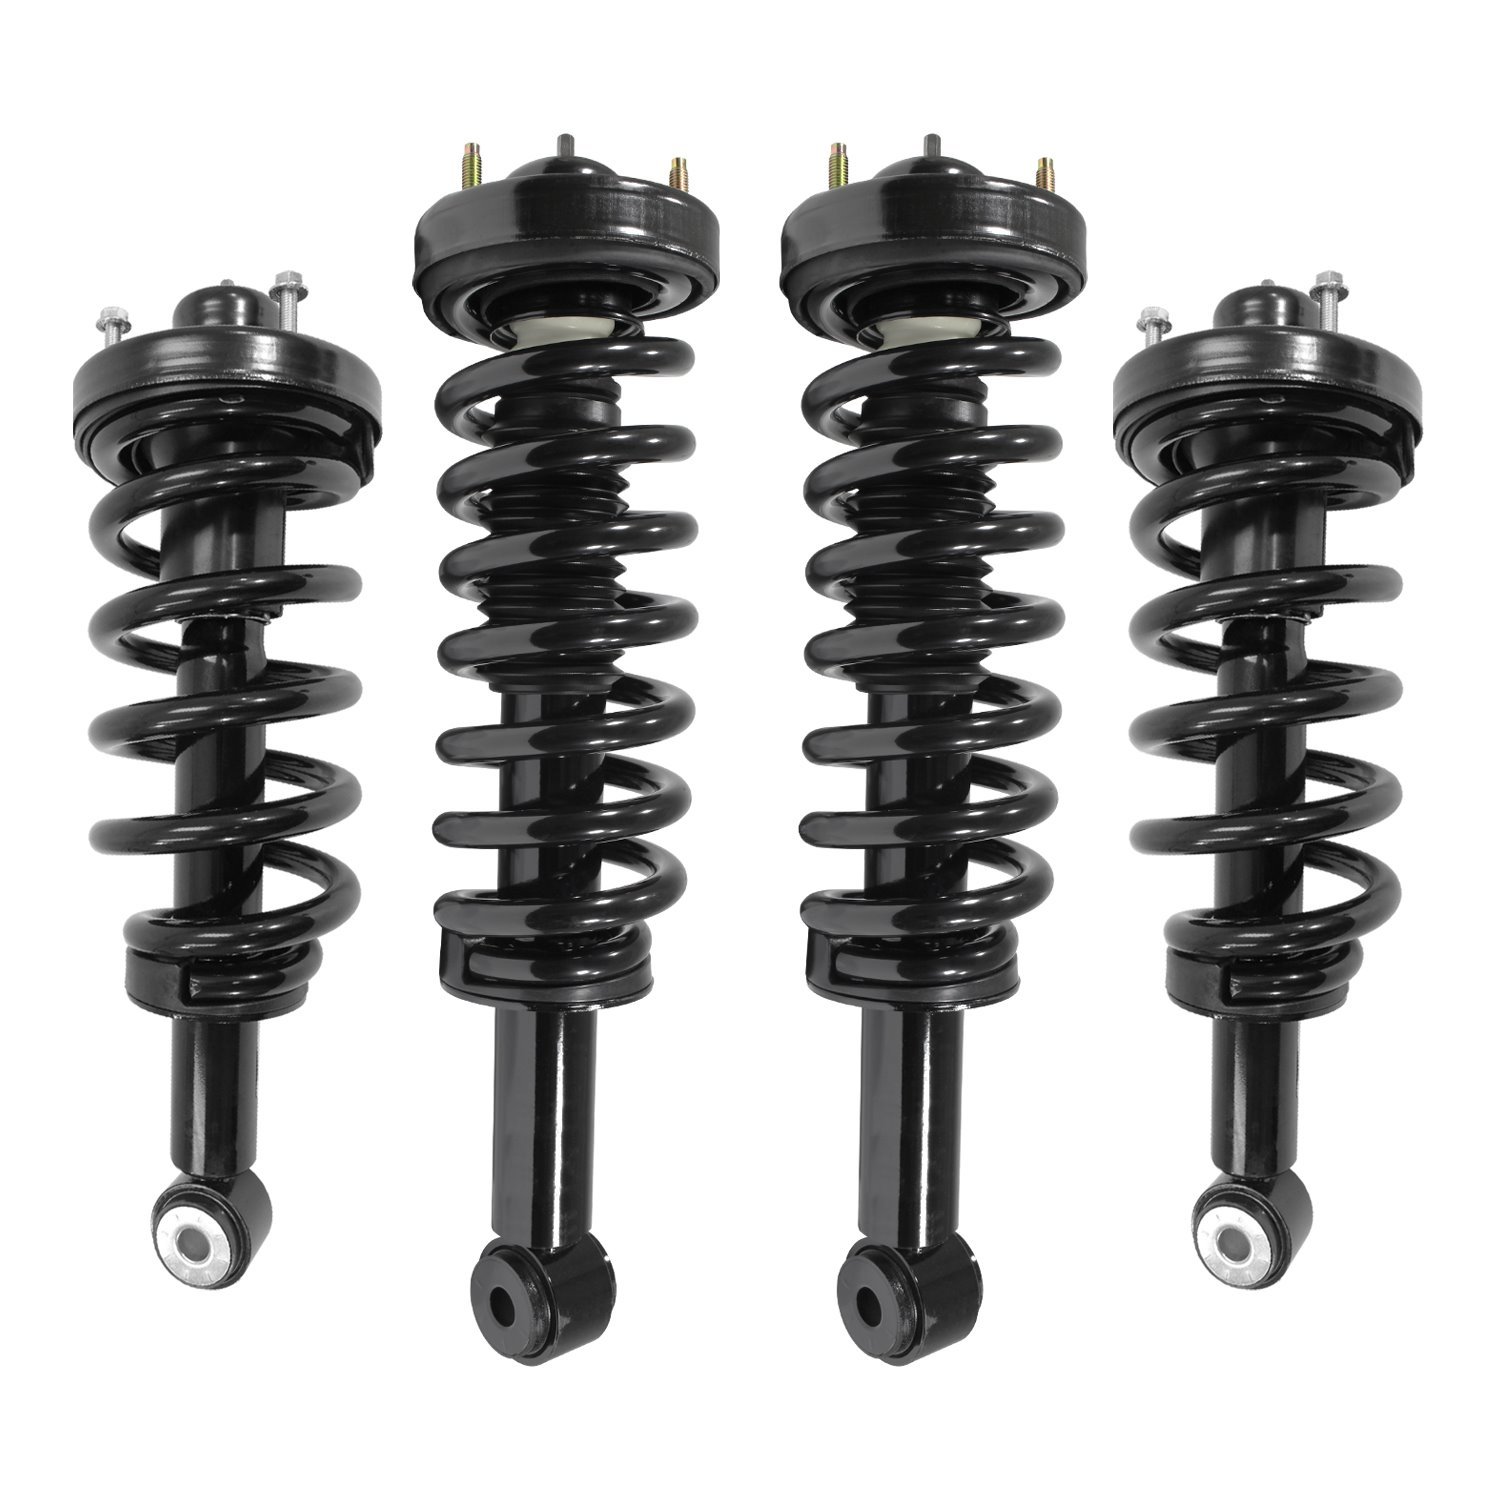 4-11900-16030-001 Front & Rear Suspension Strut & Coil Spring Assembly Kit Fits Select Ford Expedition, Lincoln Navigator